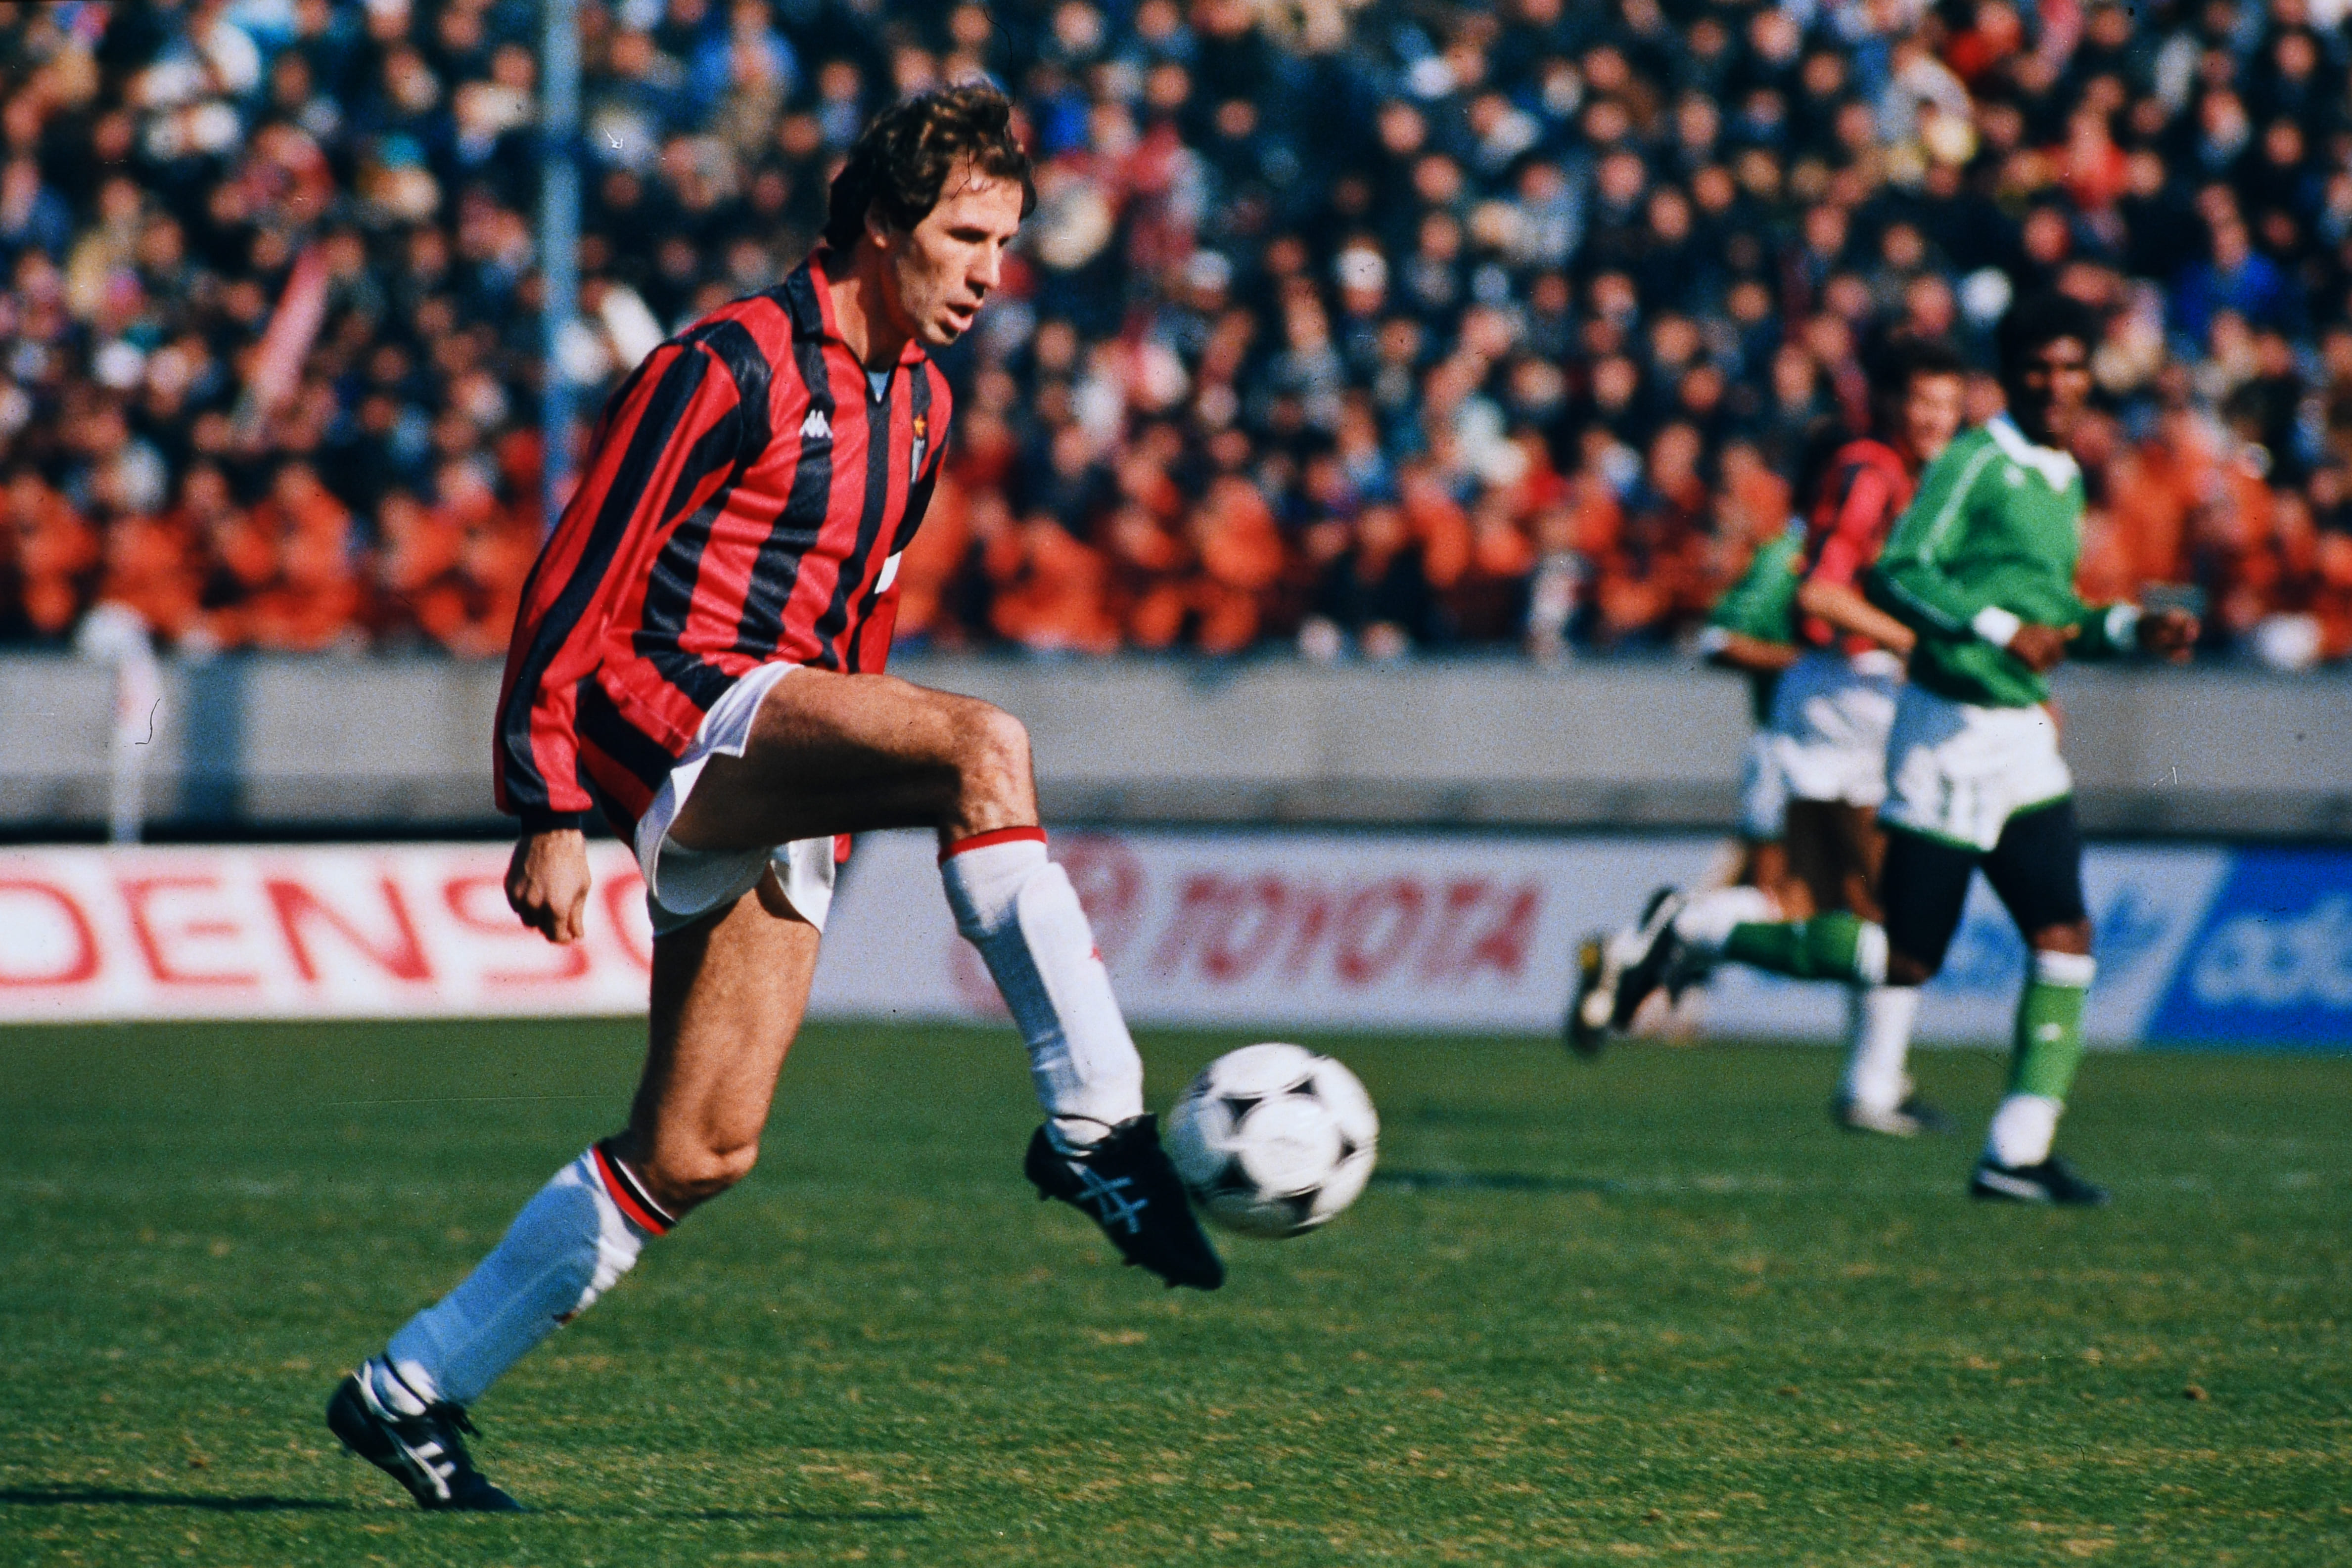 Franco Baresi in action for AC Milan against Altetico Nacional in the Intercontinental Cup in 1989.